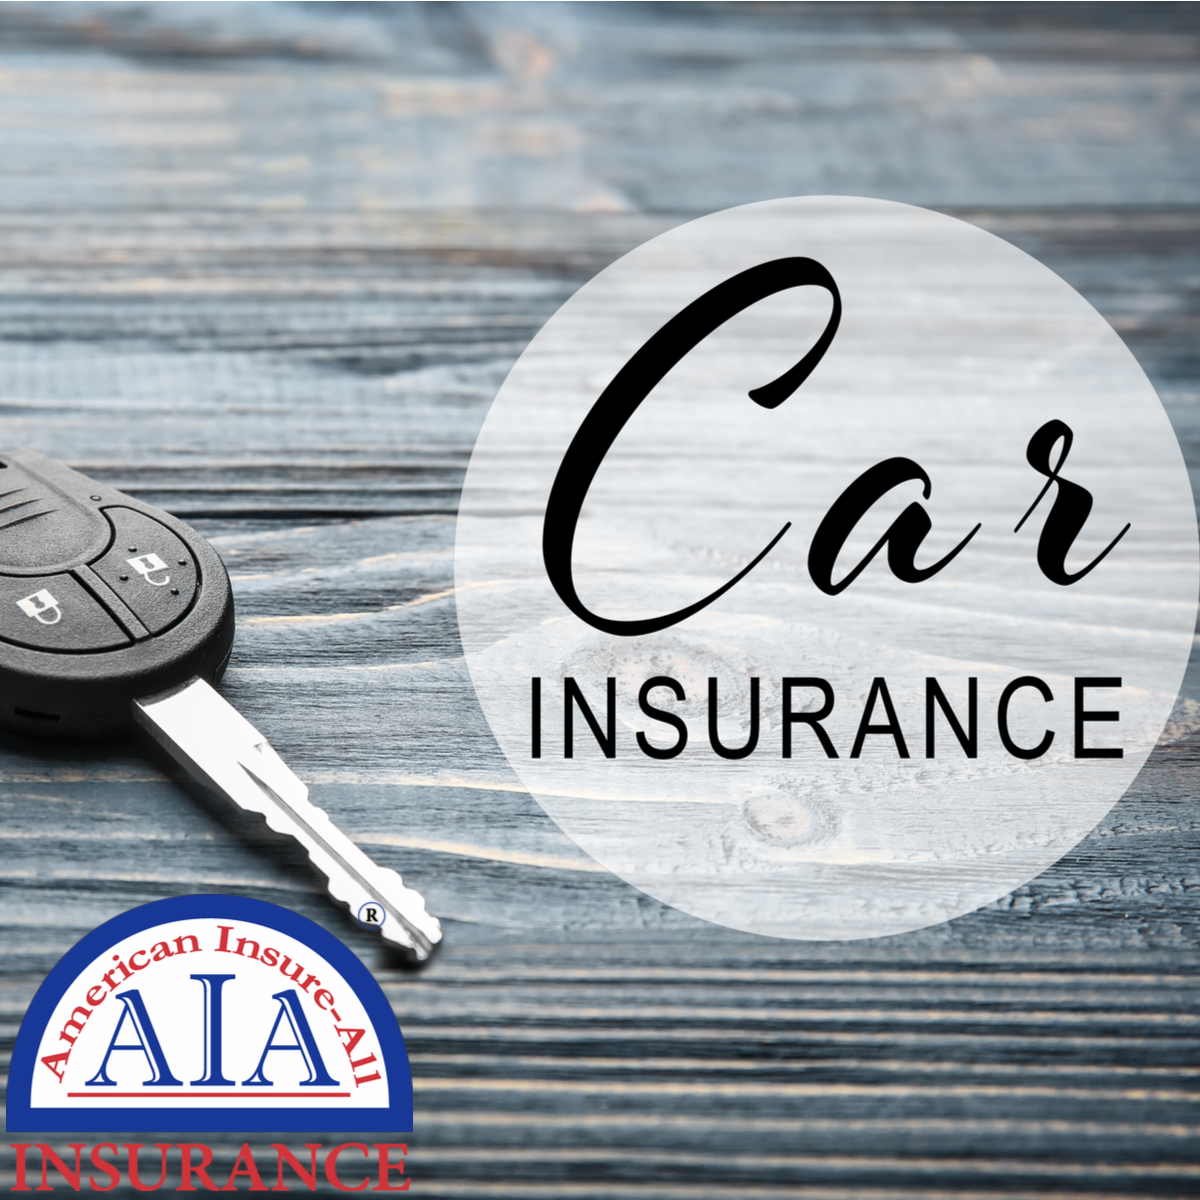 Do You Need Auto Insurance if You are Driving a New Car Off the Dealership Lot?